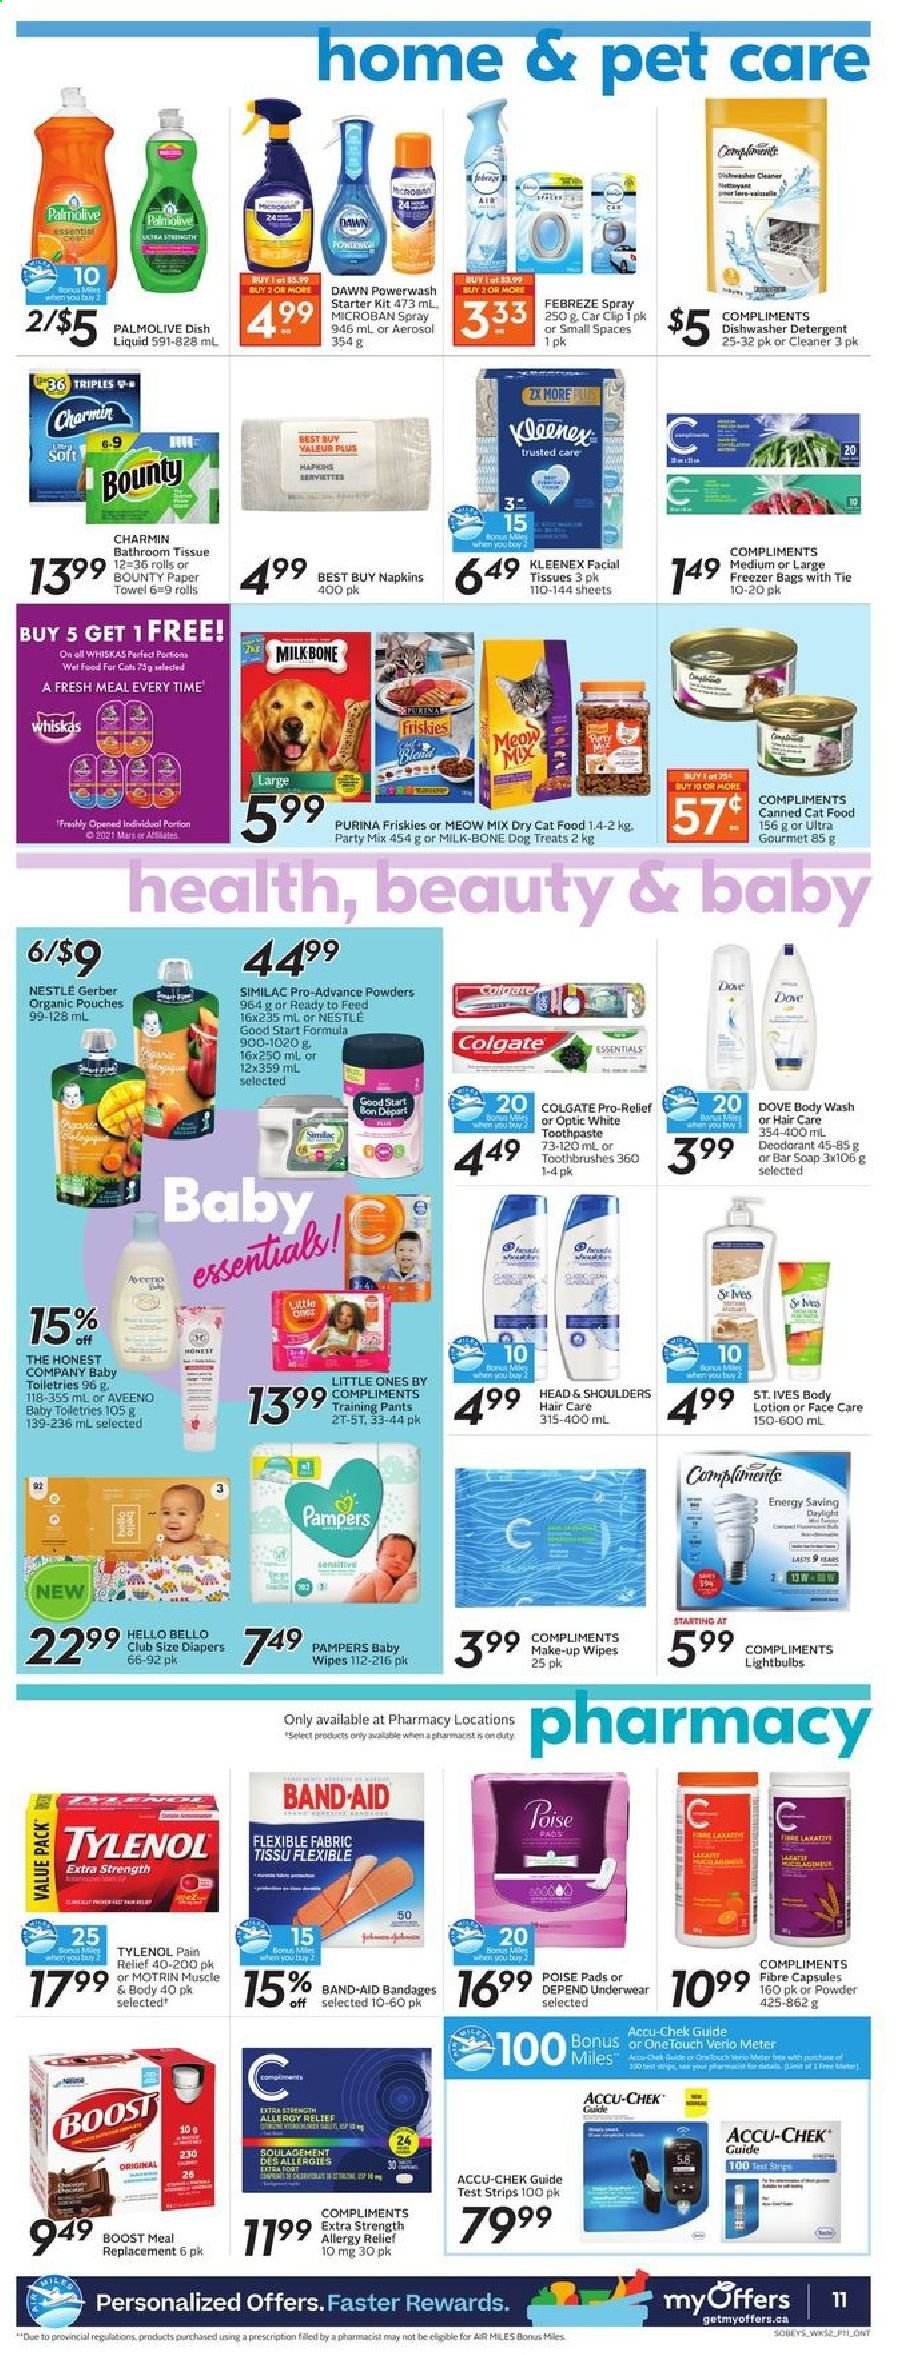 thumbnail - Sobeys Flyer - April 22, 2021 - April 28, 2021 - Sales products - milk, Bounty, Gerber, Boost, Similac, wipes, pants, baby wipes, nappies, napkins, baby pants, Aveeno, Kleenex, tissues, paper towels, Charmin, Febreze, cleaner, dishwashing liquid, body wash, Palmolive, soap bar, soap, toothpaste, facial tissues, body lotion, anti-perspirant, bag, makeup, animal food, cat food, Purina, Meow Mix, Friskies, pain relief, Tylenol, allergy relief, Motrin, Nestlé, Head & Shoulders, Pampers, deodorant. Page 11.